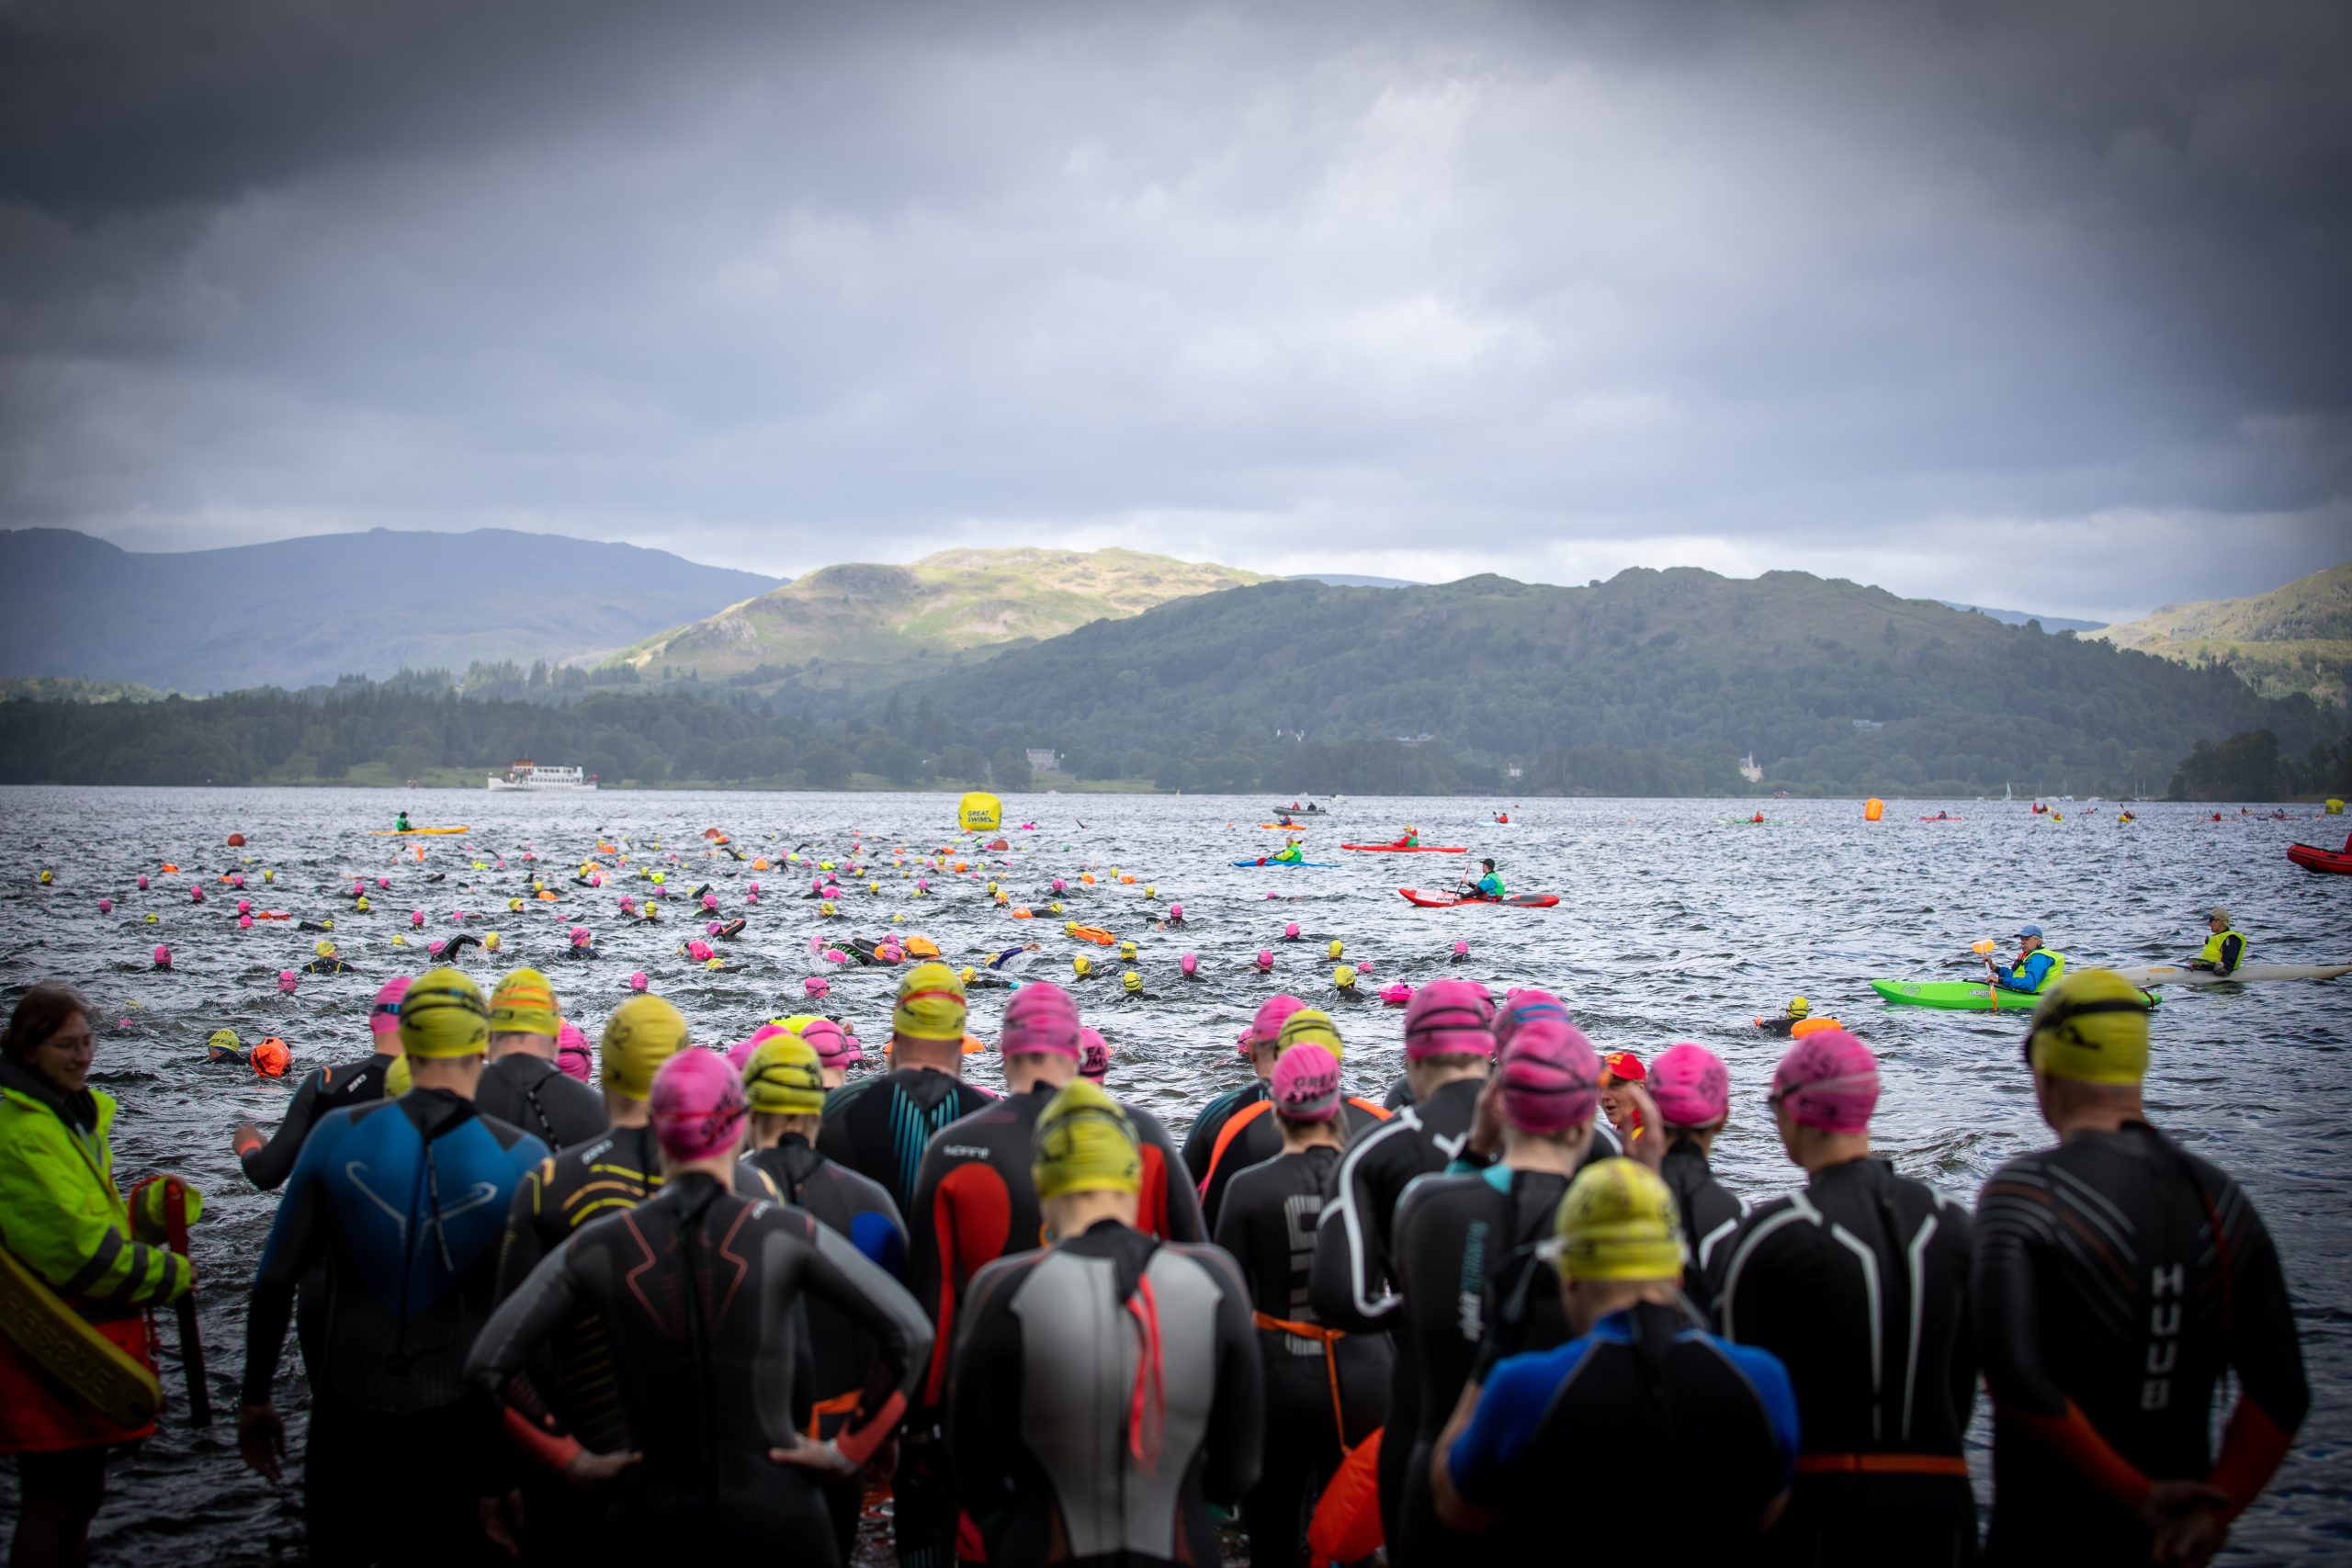 A group of people all wearing brightly coloured swimming caps standing in the foreground with a lake in the background and hills beyond